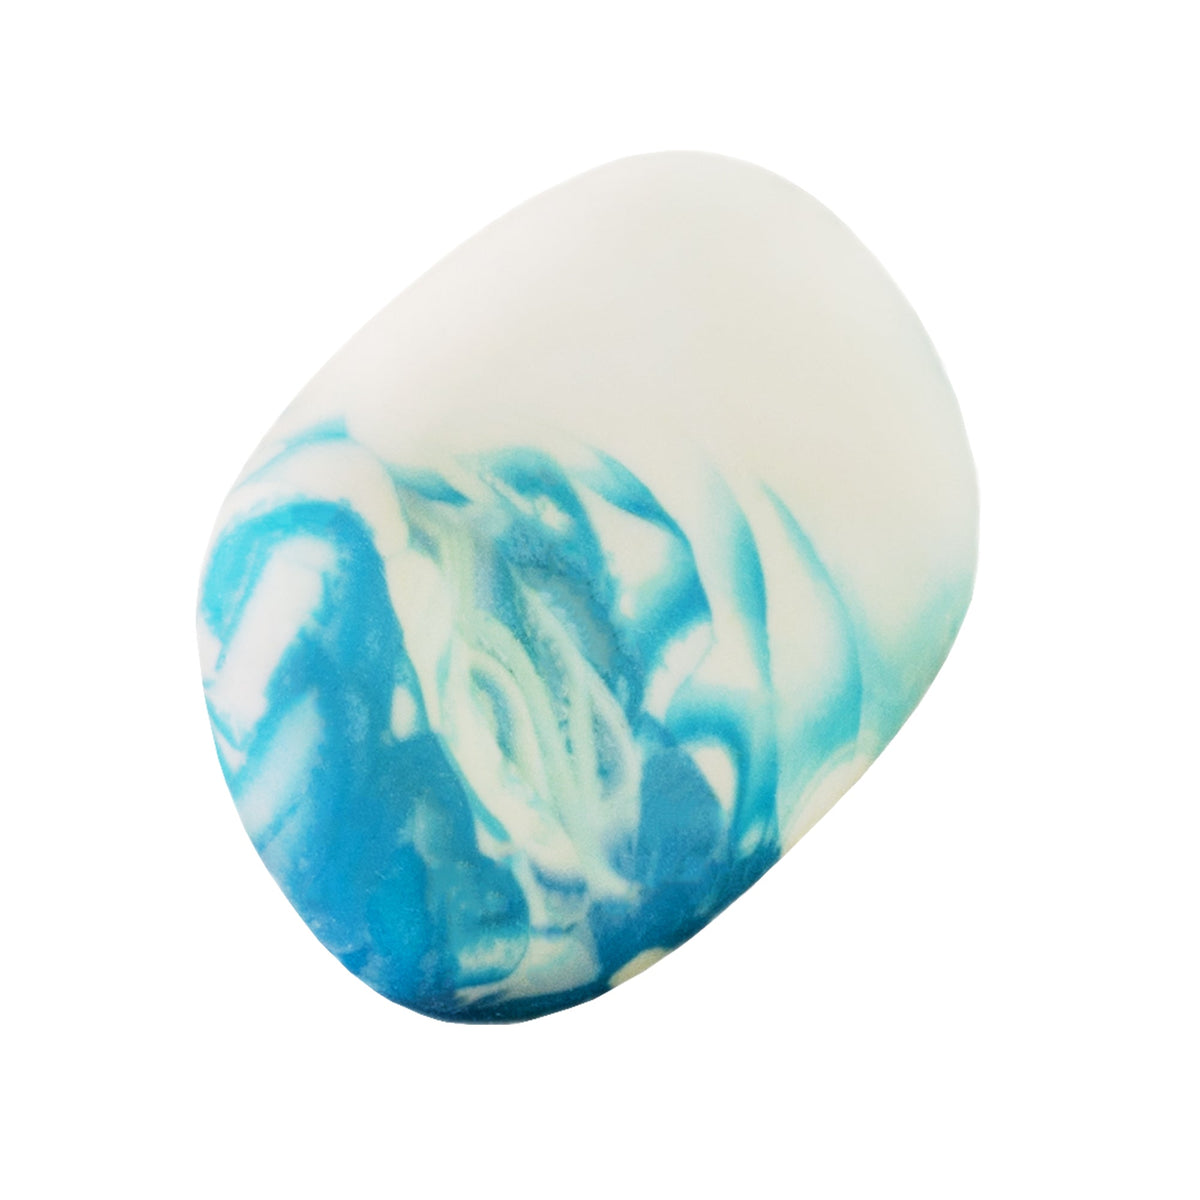 Pacific Arc, New Eraser: Wave - Soft plastic - blue and white